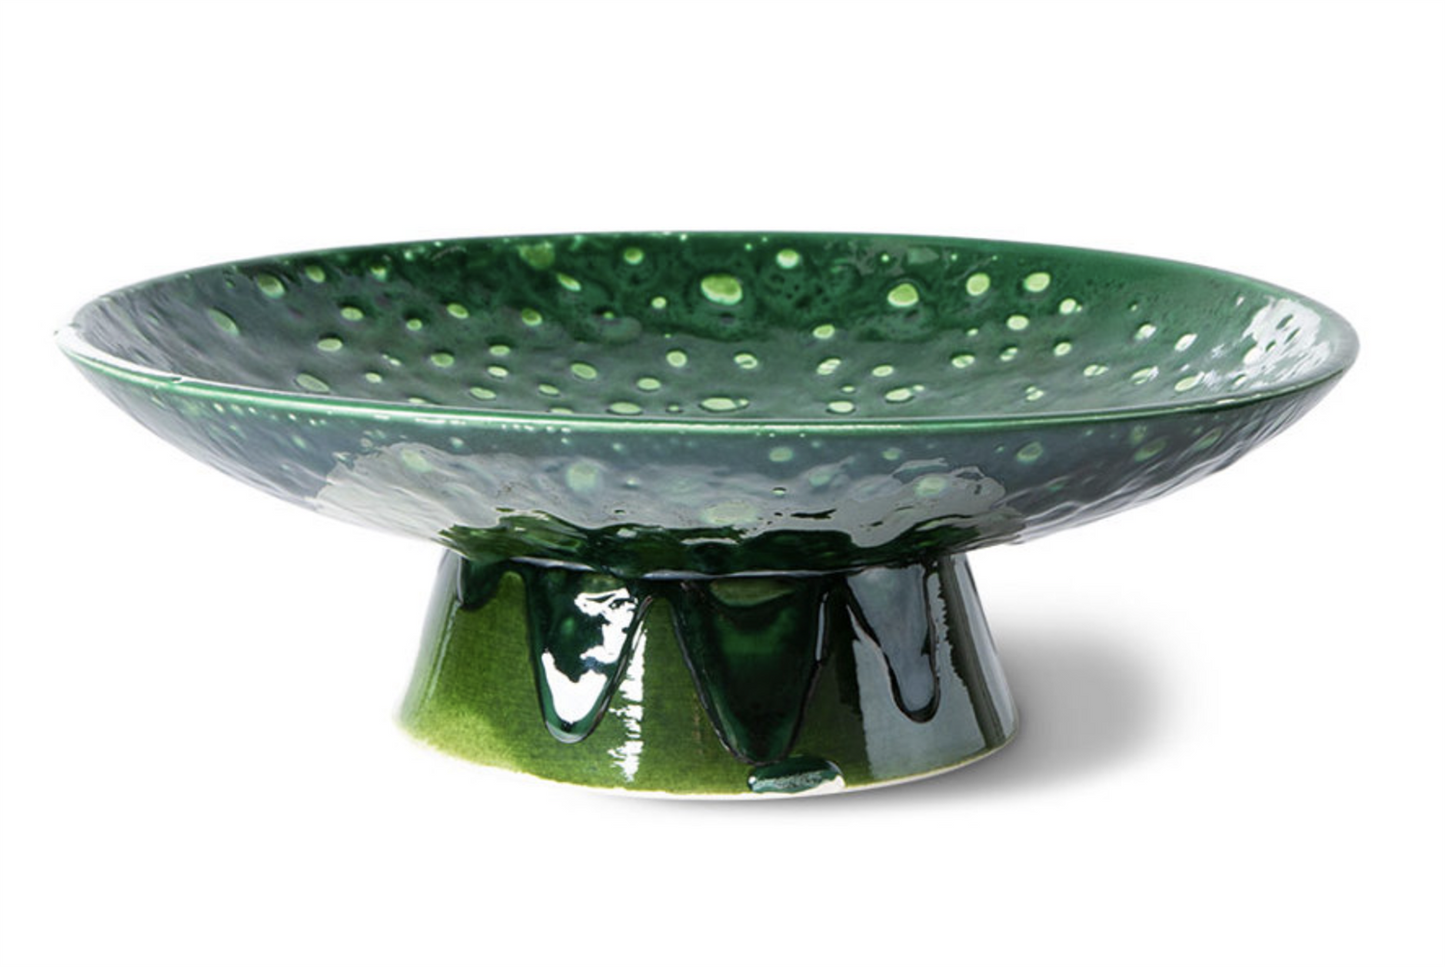 The emeralds bowl on base dripping green L